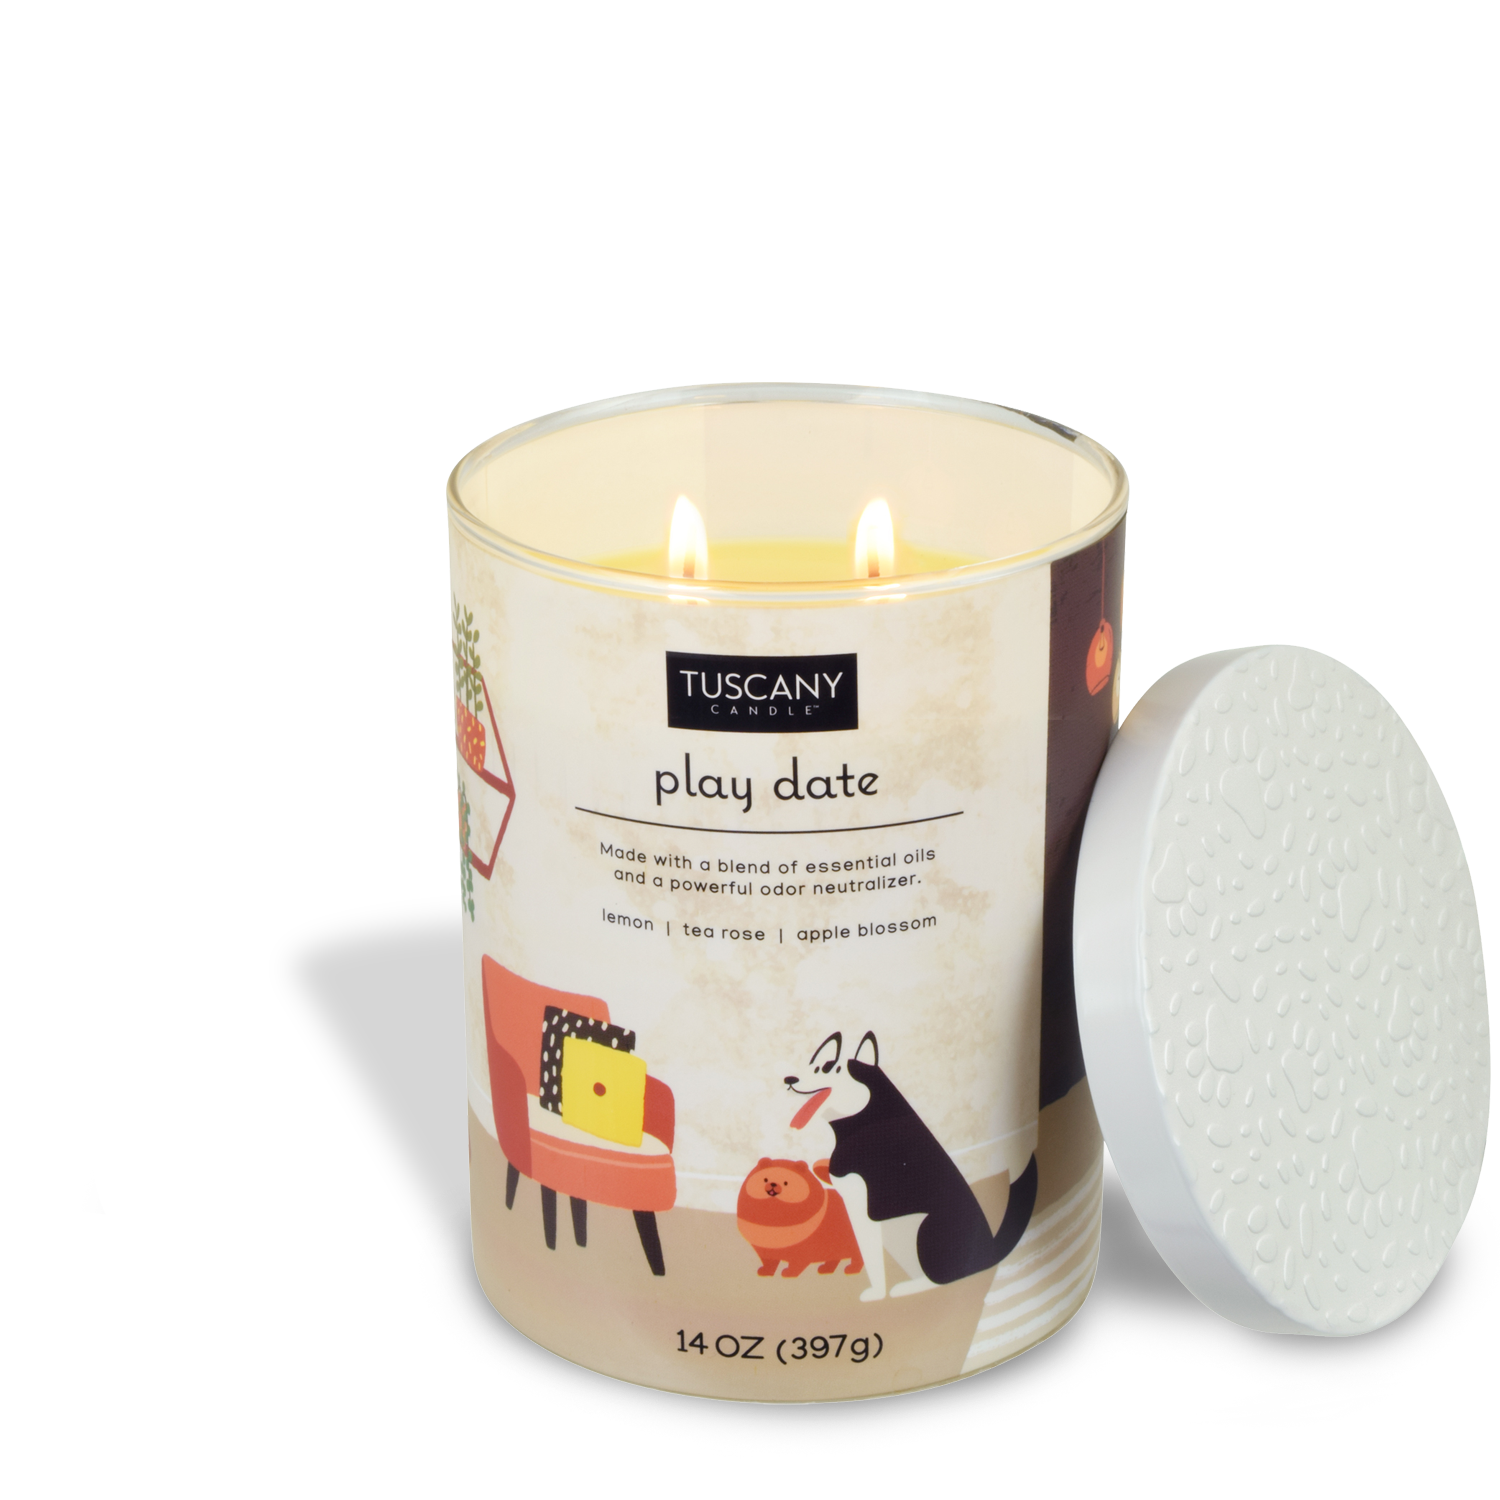 A Tuscany Candle Play Date Scented Jar Candle (14 oz) – Pet Odor Control Collection, perfect for tackling pet odors and leaving your space fresh and clean.